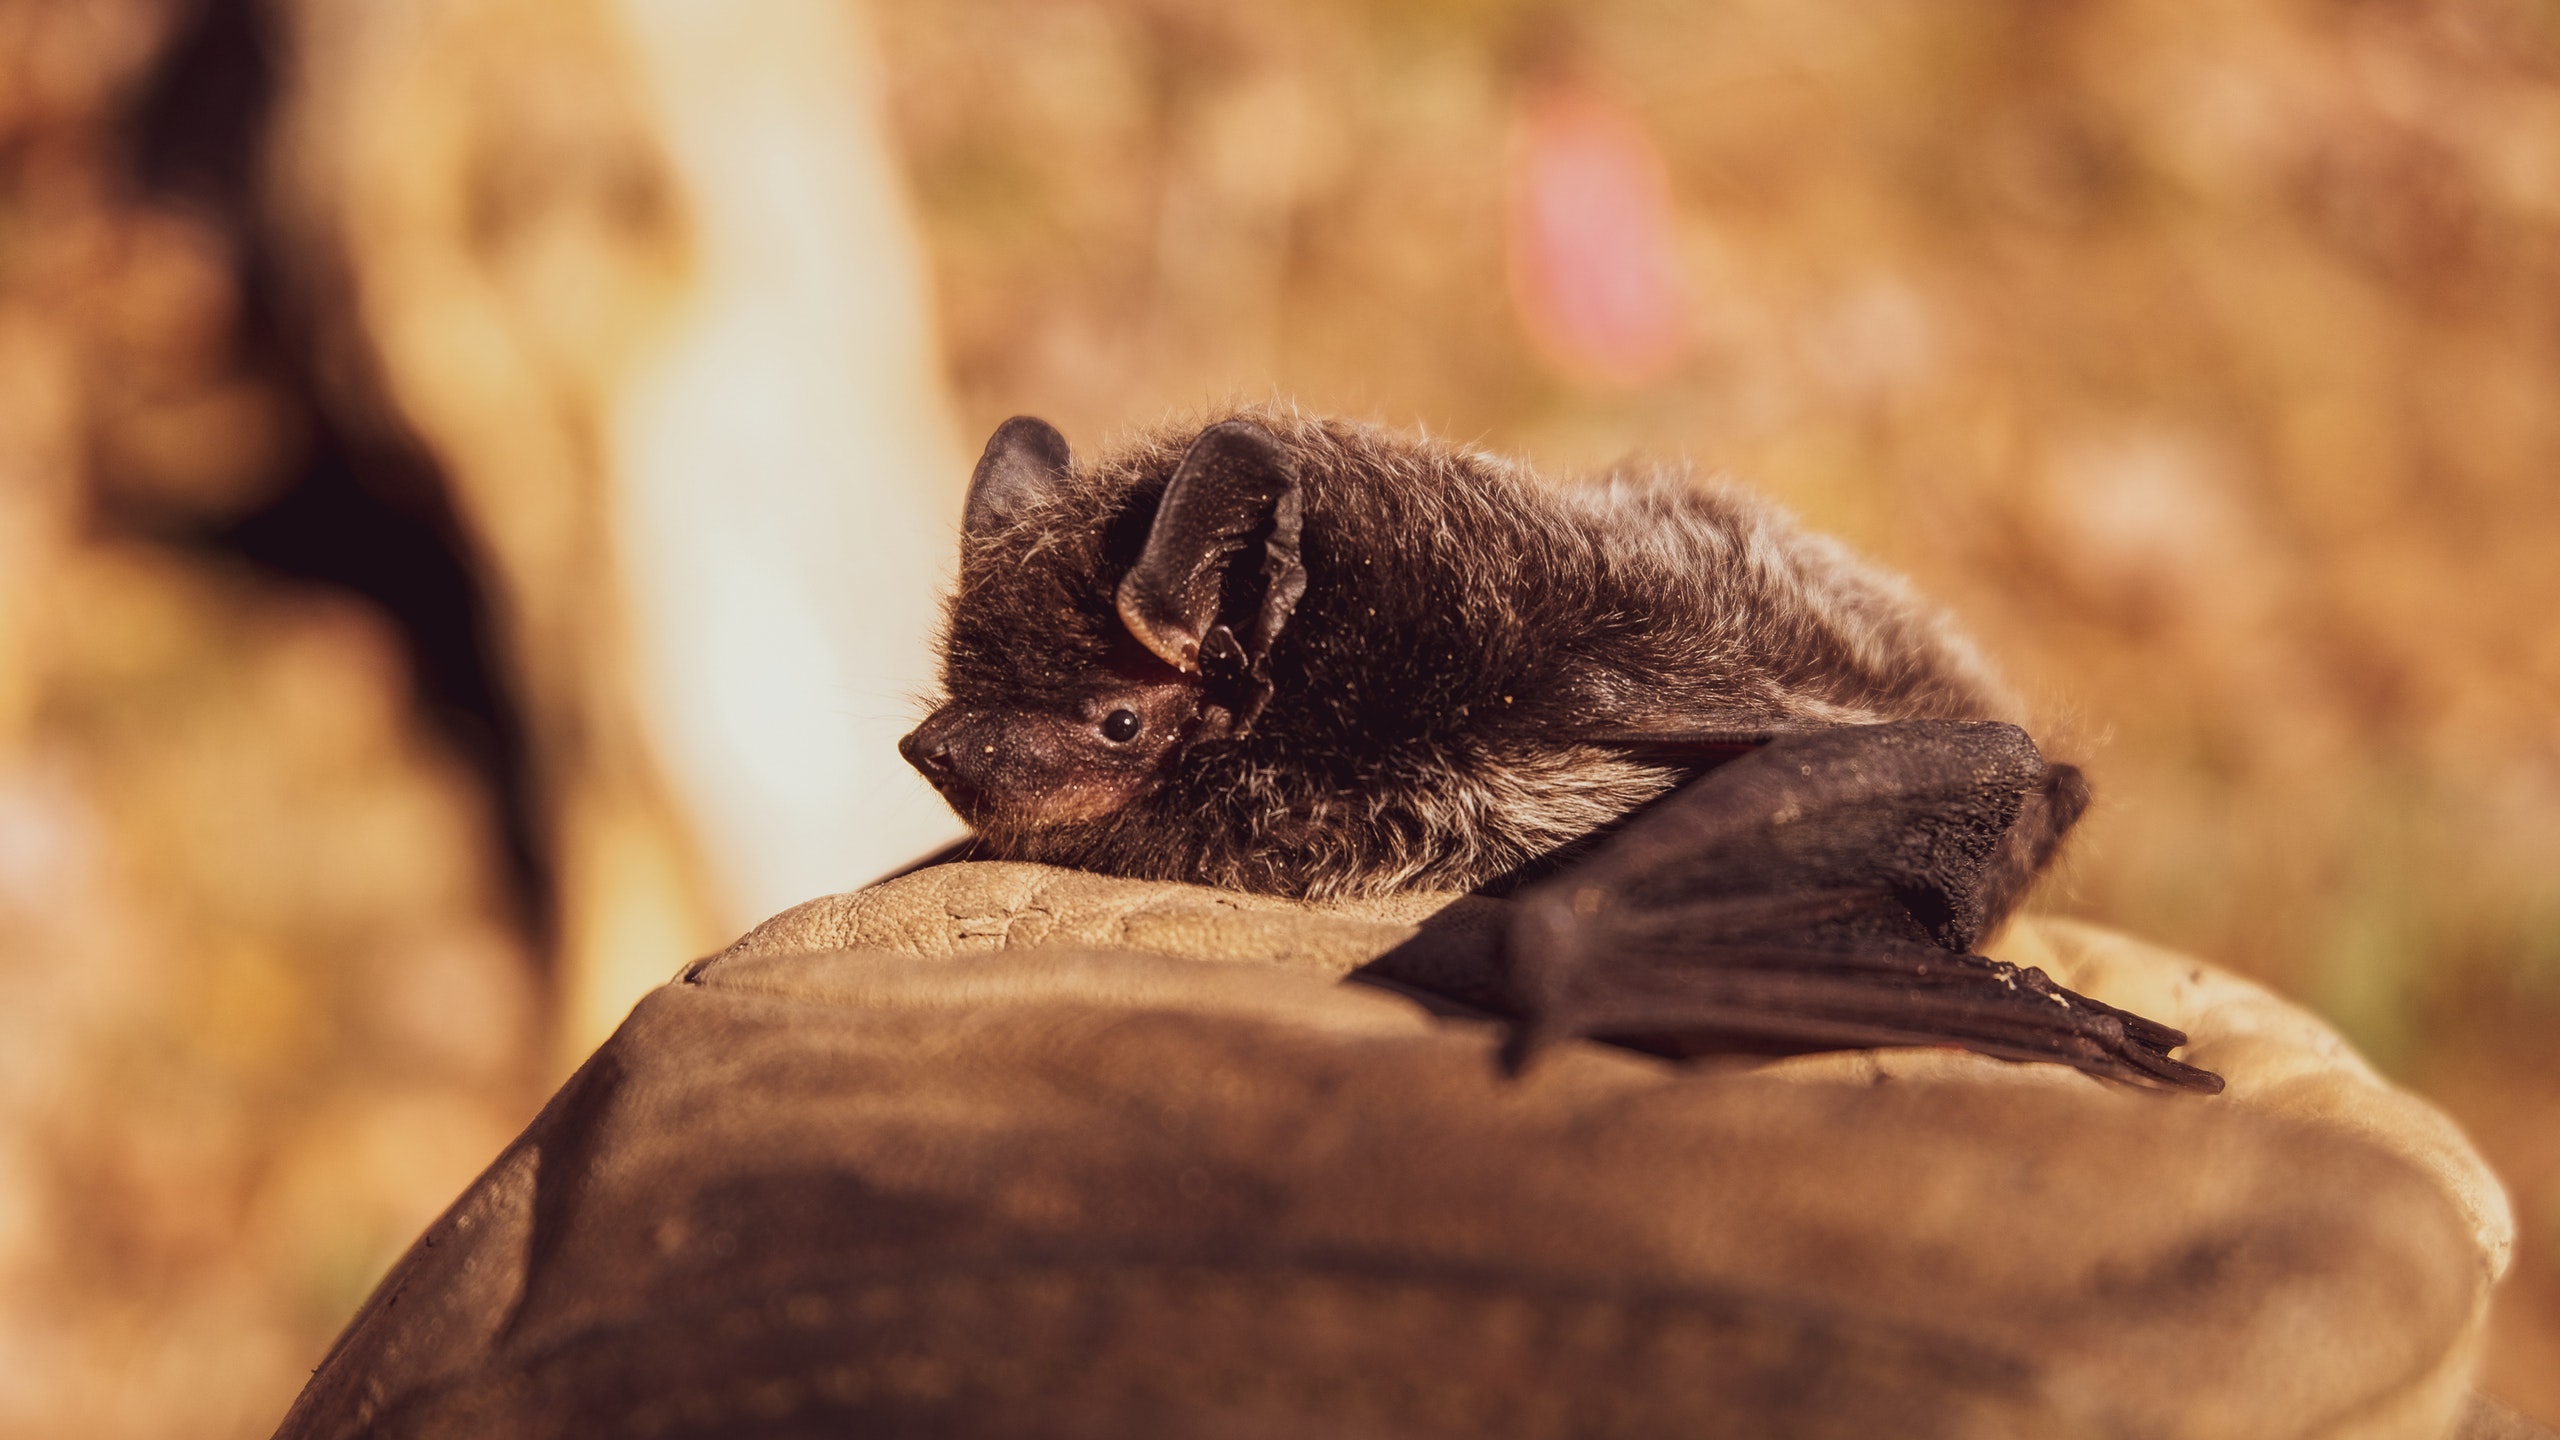 Don’t Blame Bats for COVID-19, Israeli Biologists Say (VIDEO REPORT)